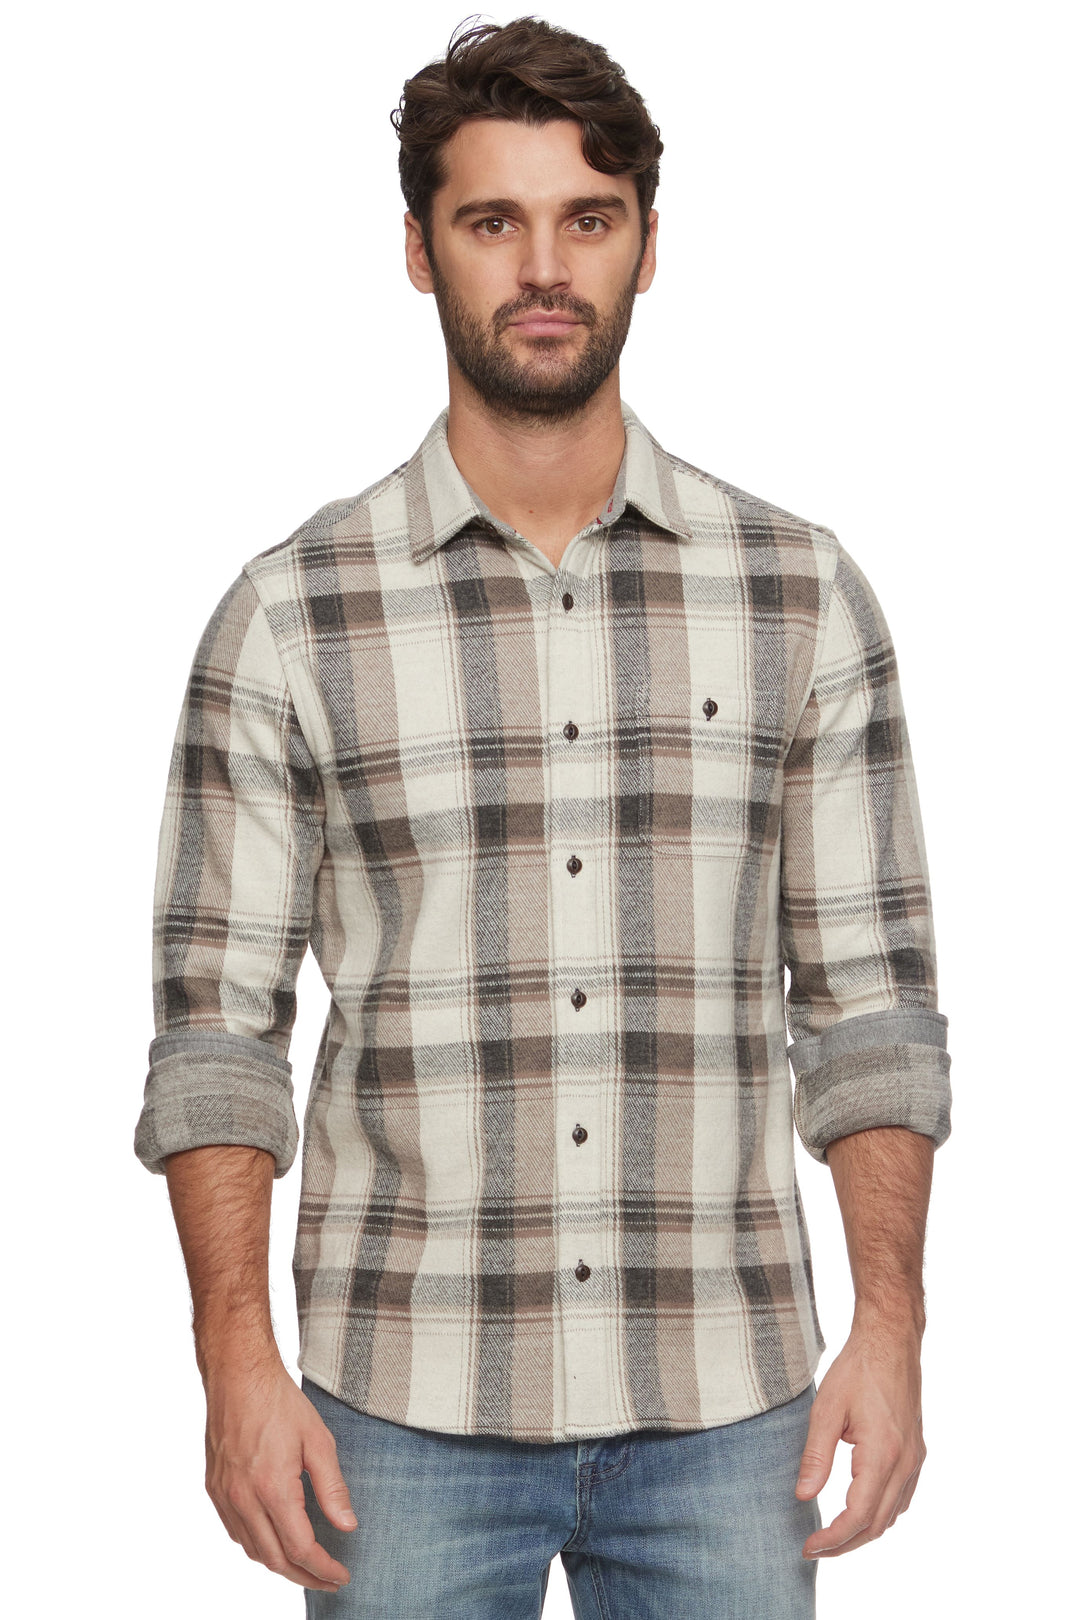 Flag & Anthem Clearbrook LS Hero Knit Flannel